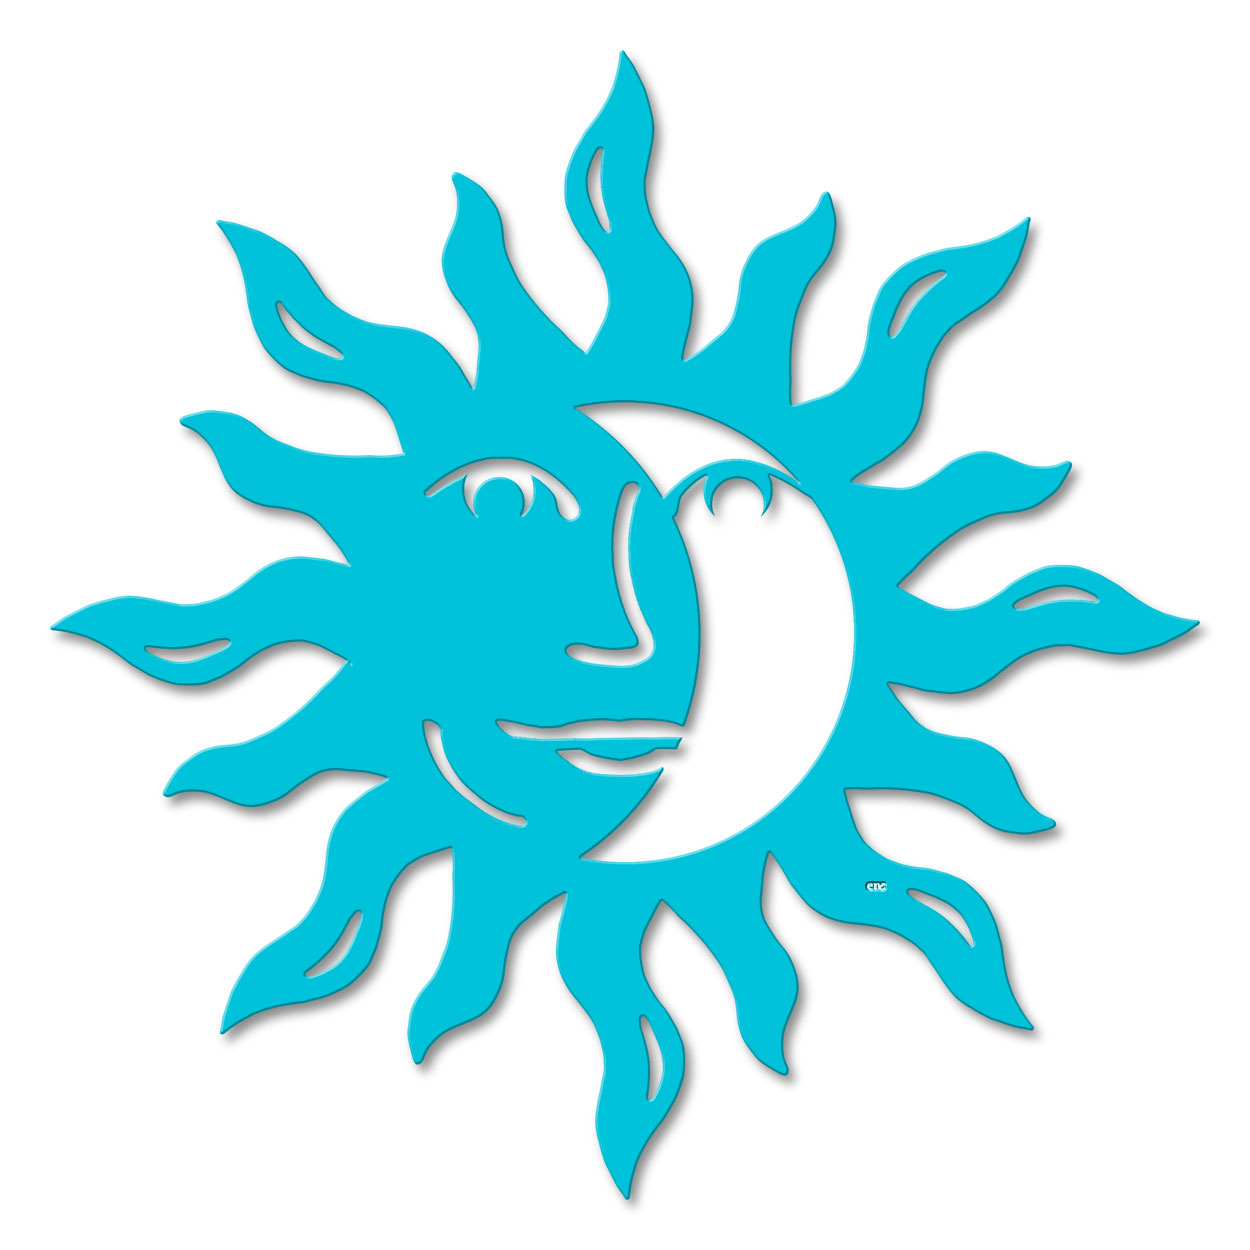 625040 - 18 or 24in Metal Wall Art - Sunface Eclipse - Choose Color